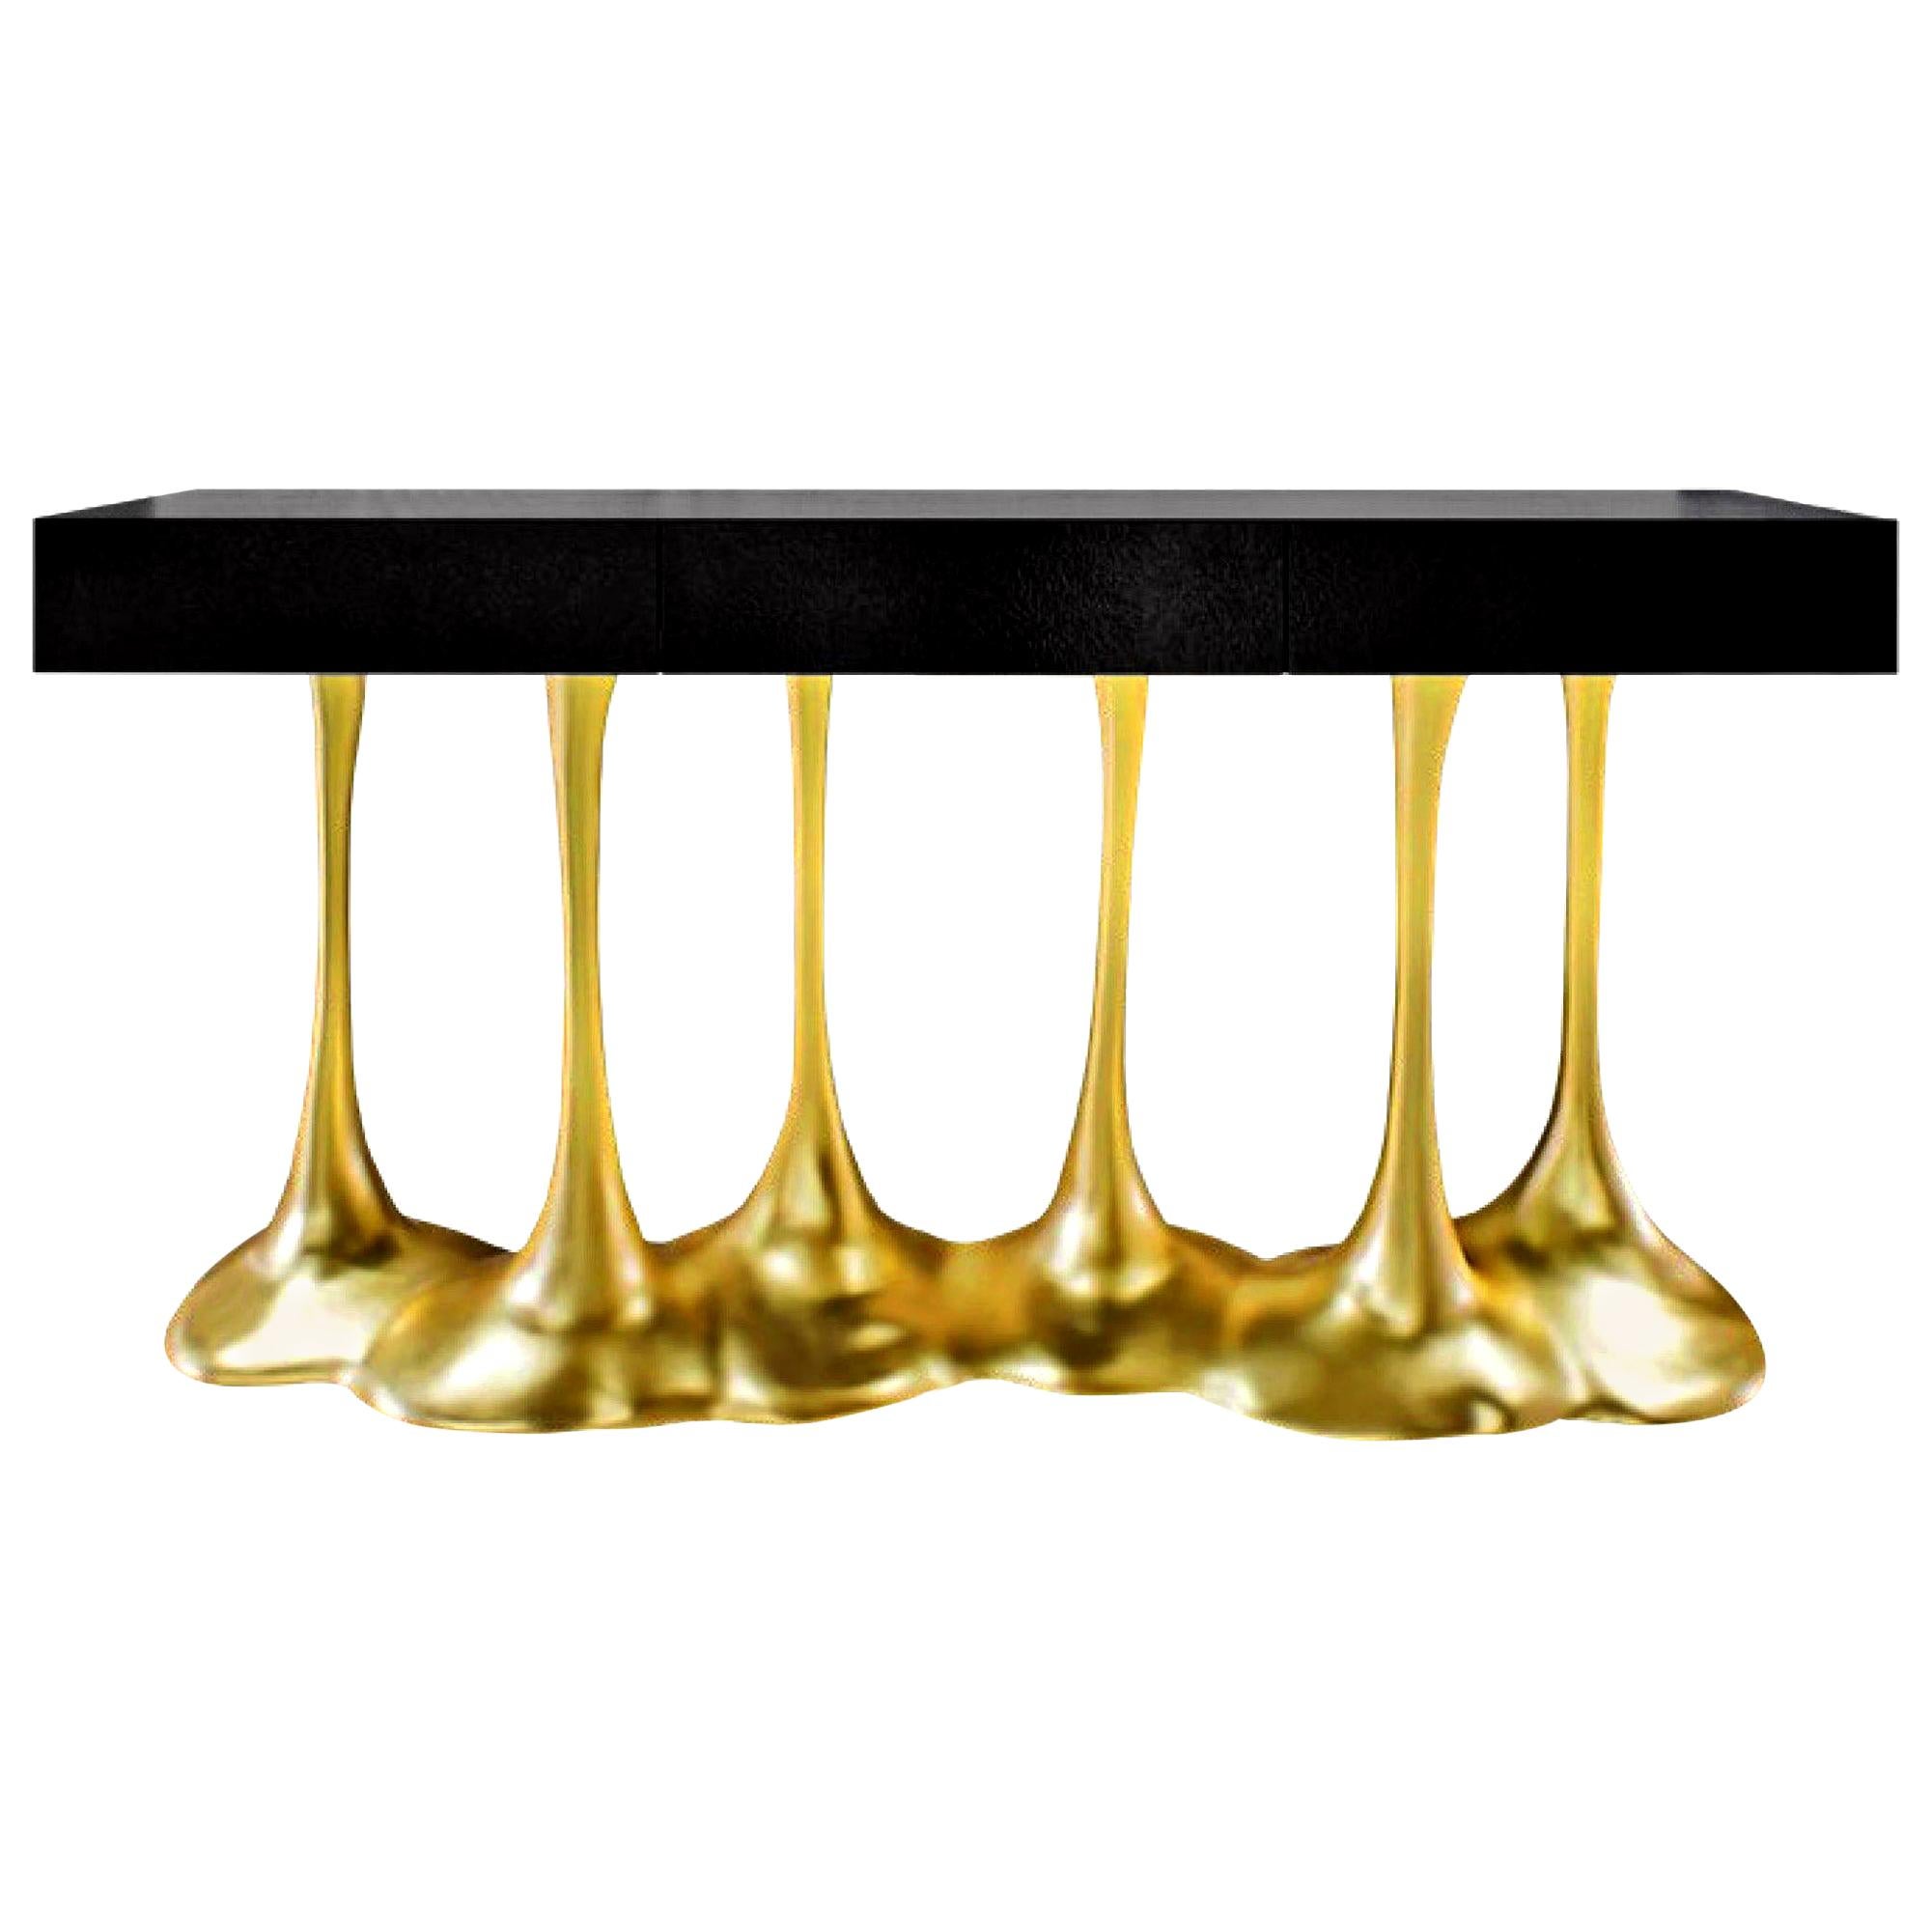 Sculptural and Luxurious "Argos" Futuristic Console Table in Black and Gold For Sale